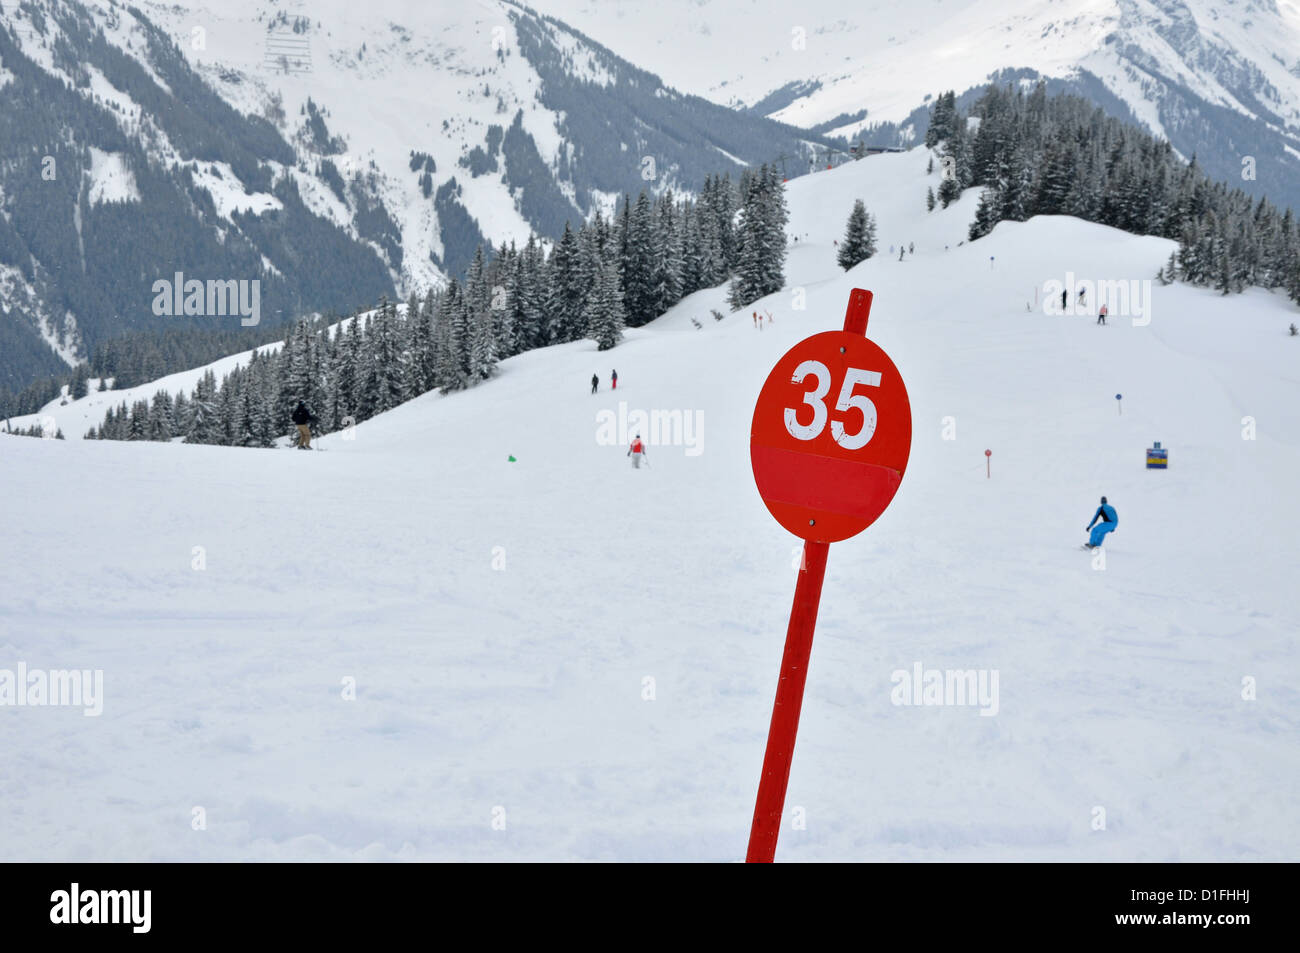 A red ski slope with number 35 in the Austrian Alps Stock Photo